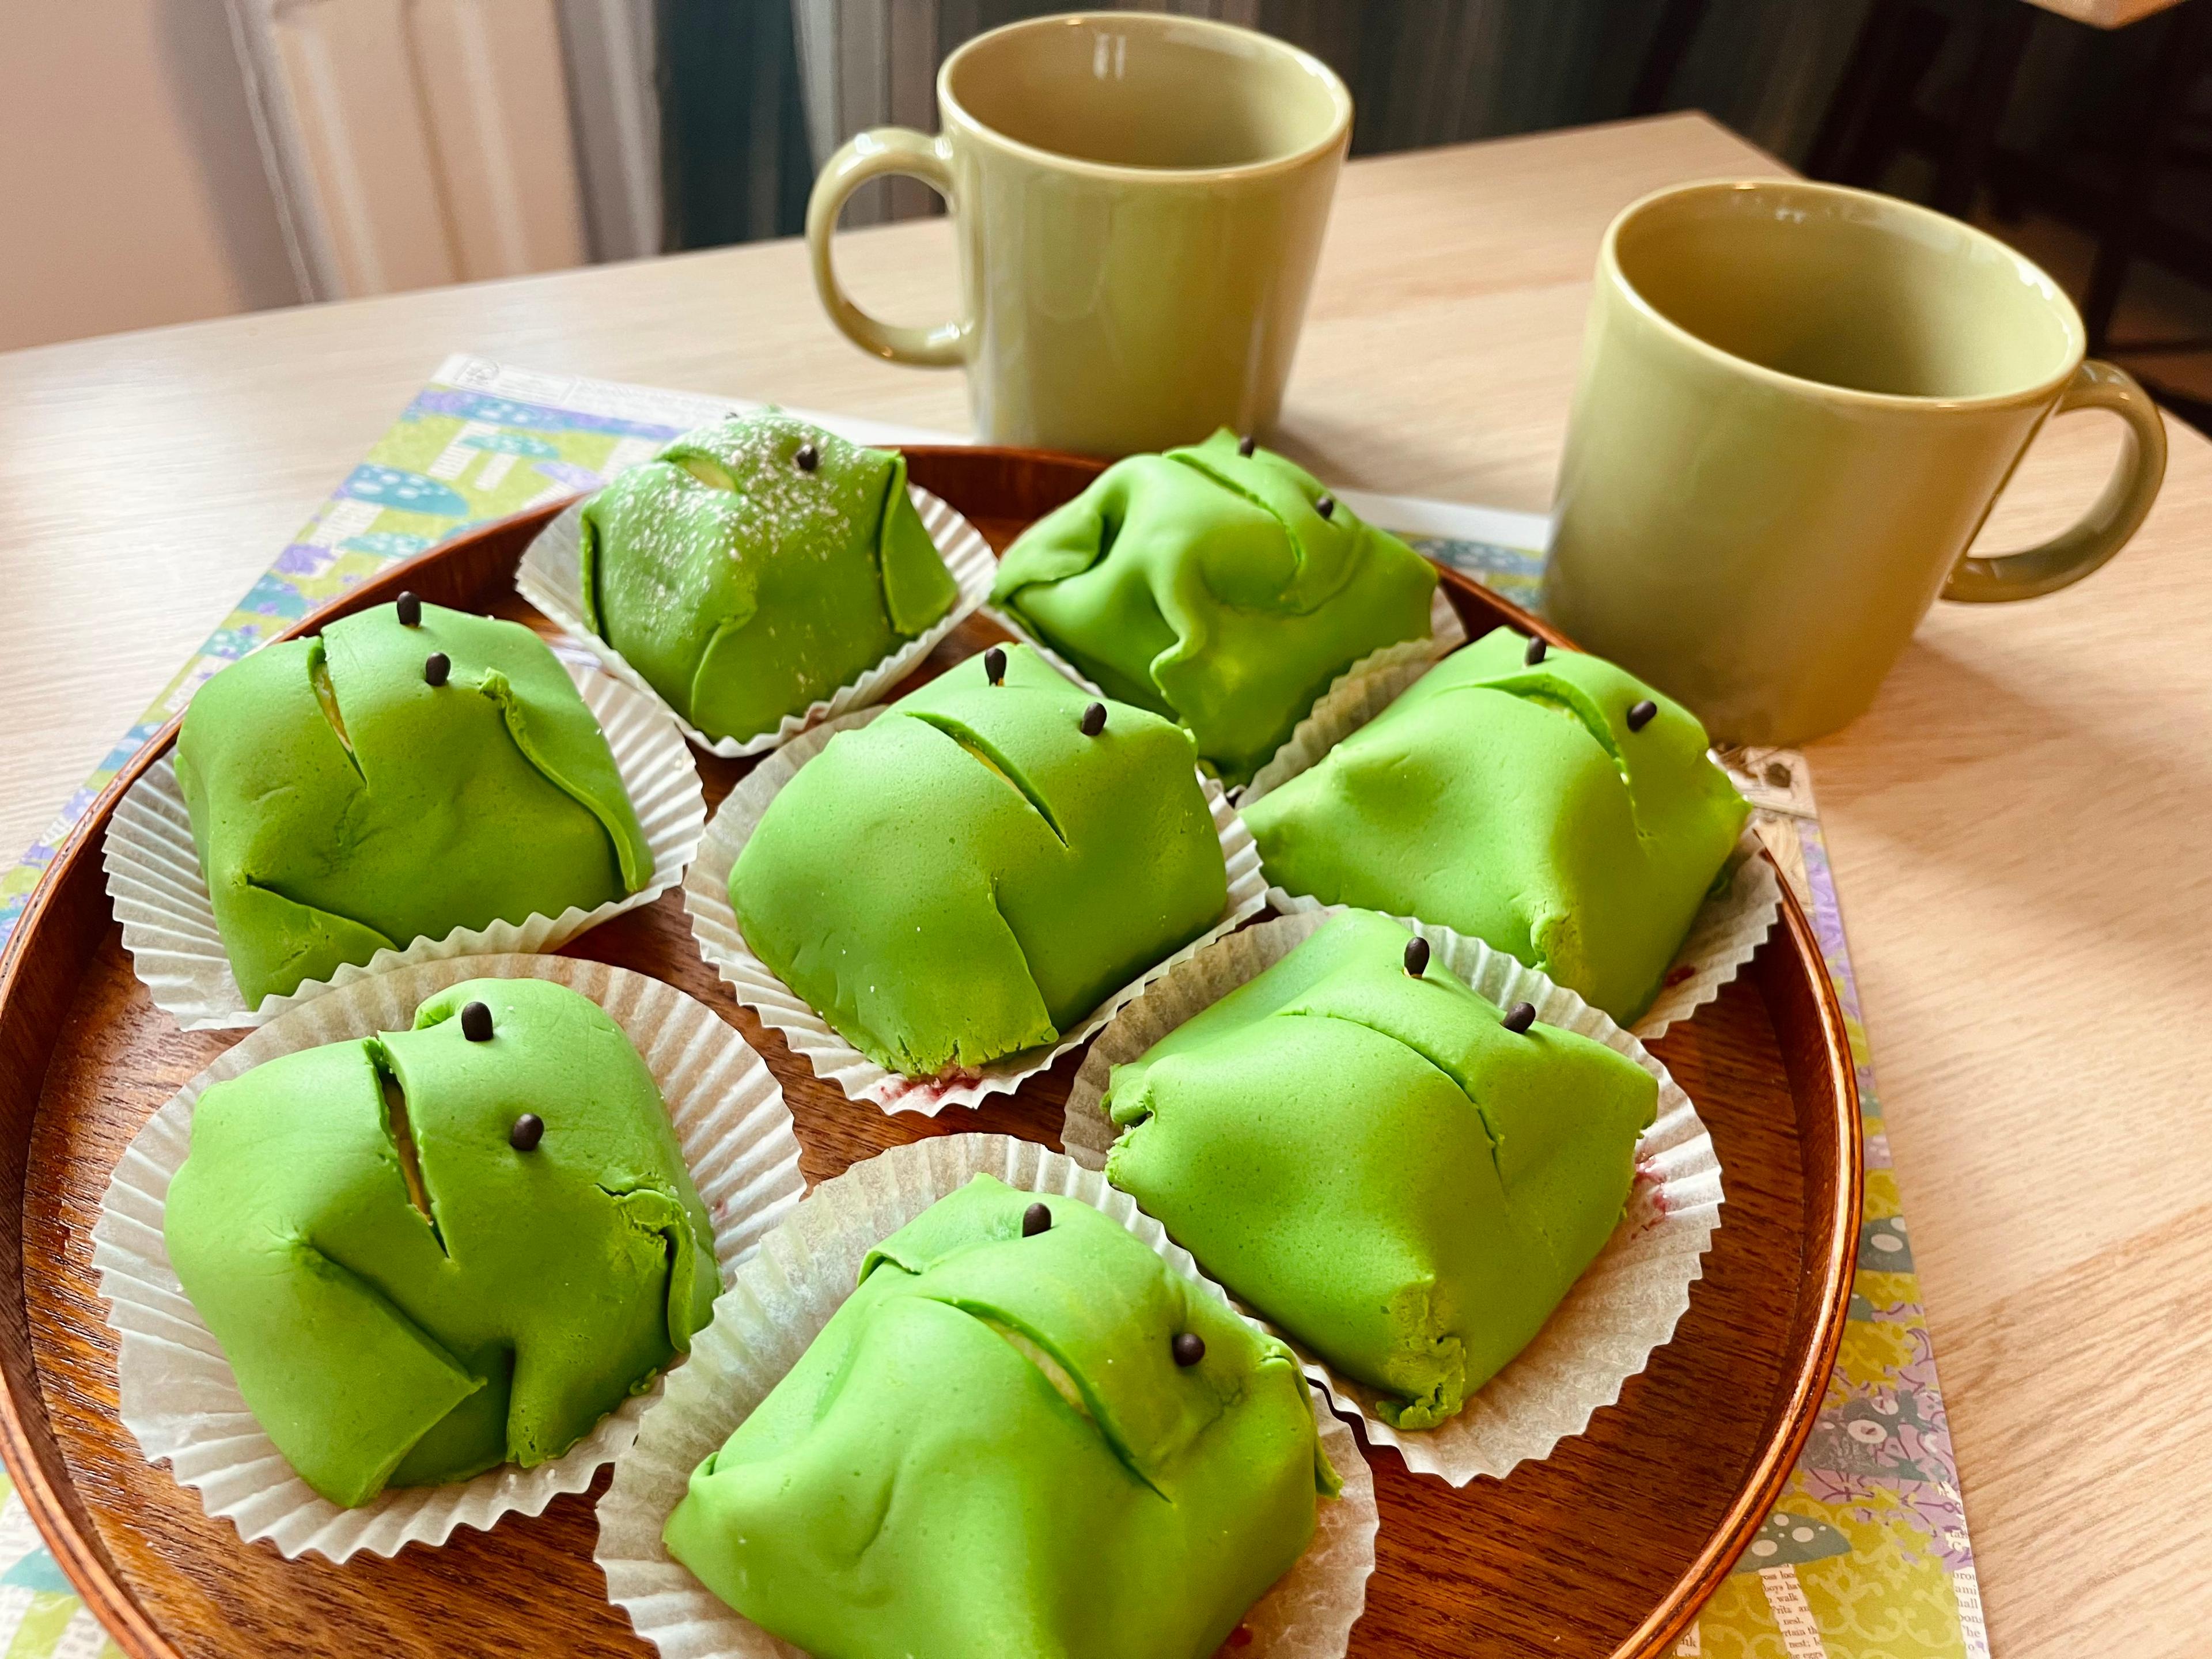 Our semi-successful attempt at making signature Balfours frog cakes, and a newborn tradition.